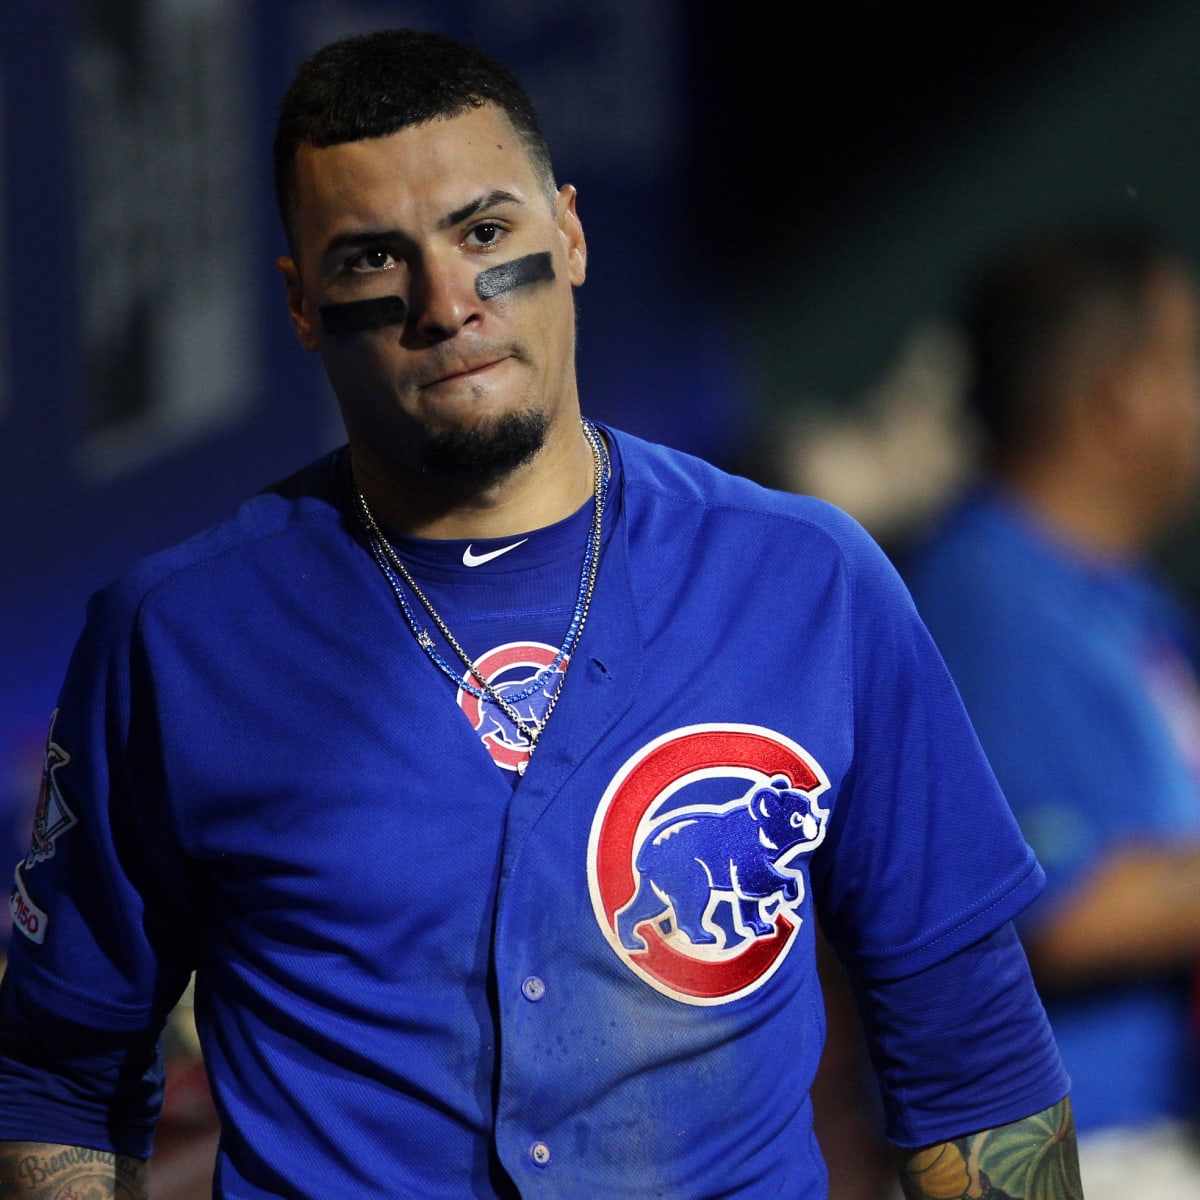 Javier Báez injury: Cubs star has hairline thumb fracture - Sports